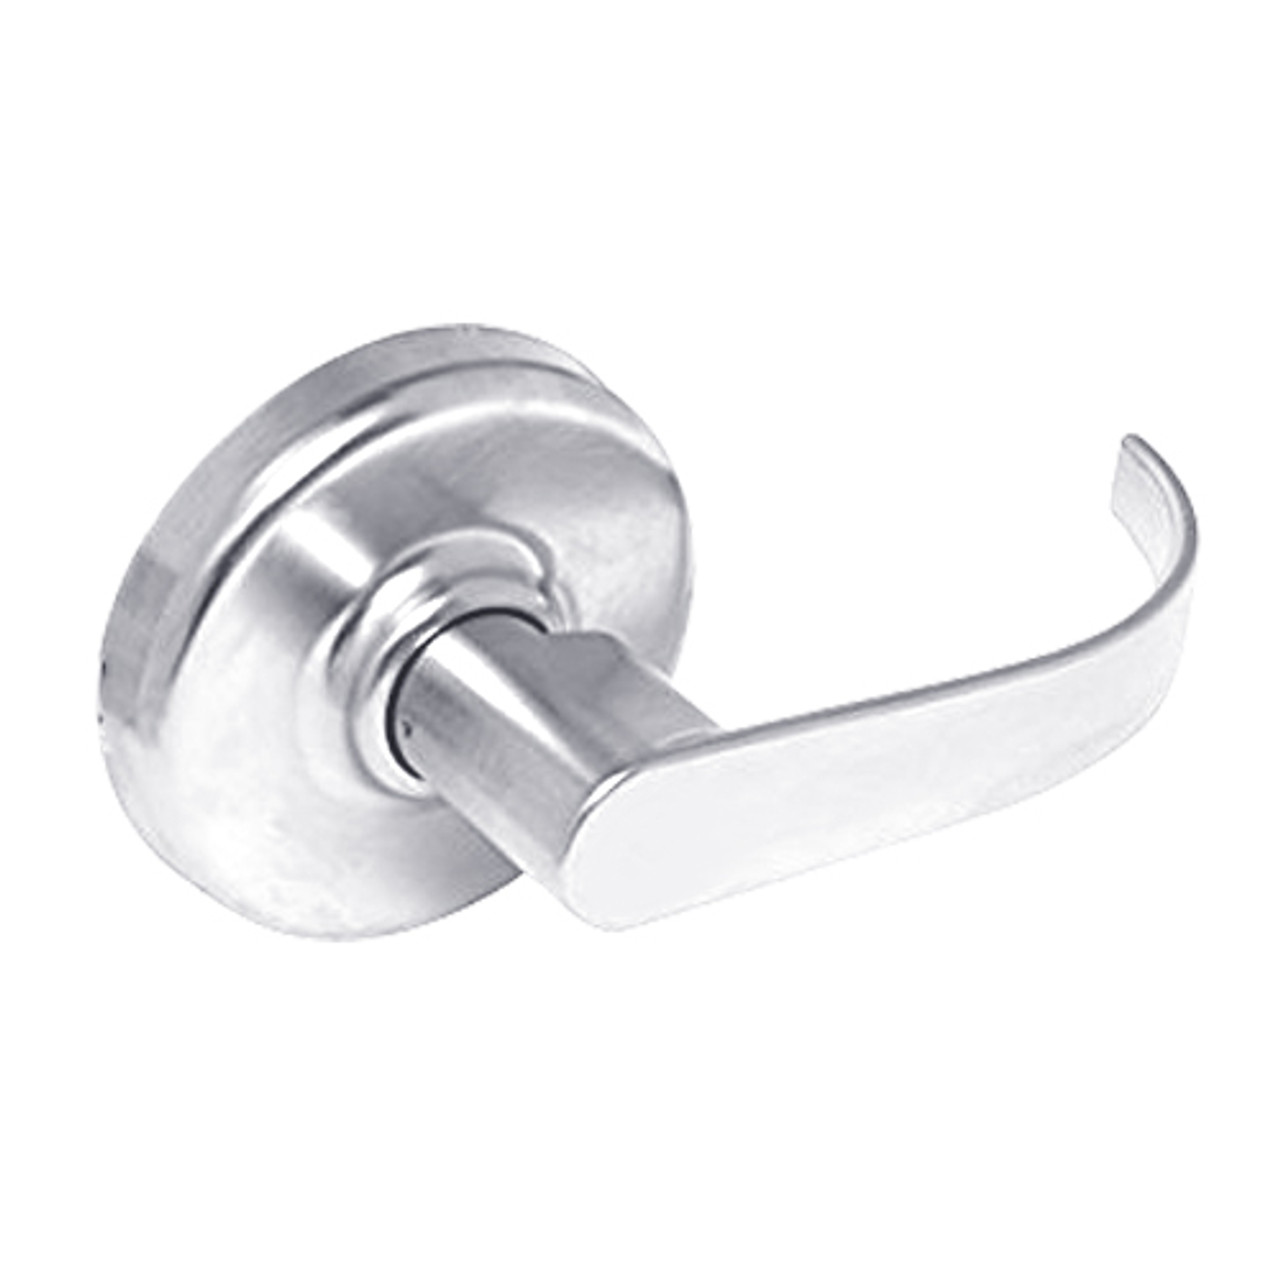 CL3170-PZD-625 Corbin CL3100 Series Vandal Resistant Full Dummy Cylindrical Locksets with Princeton Lever in Bright Chrome Finish